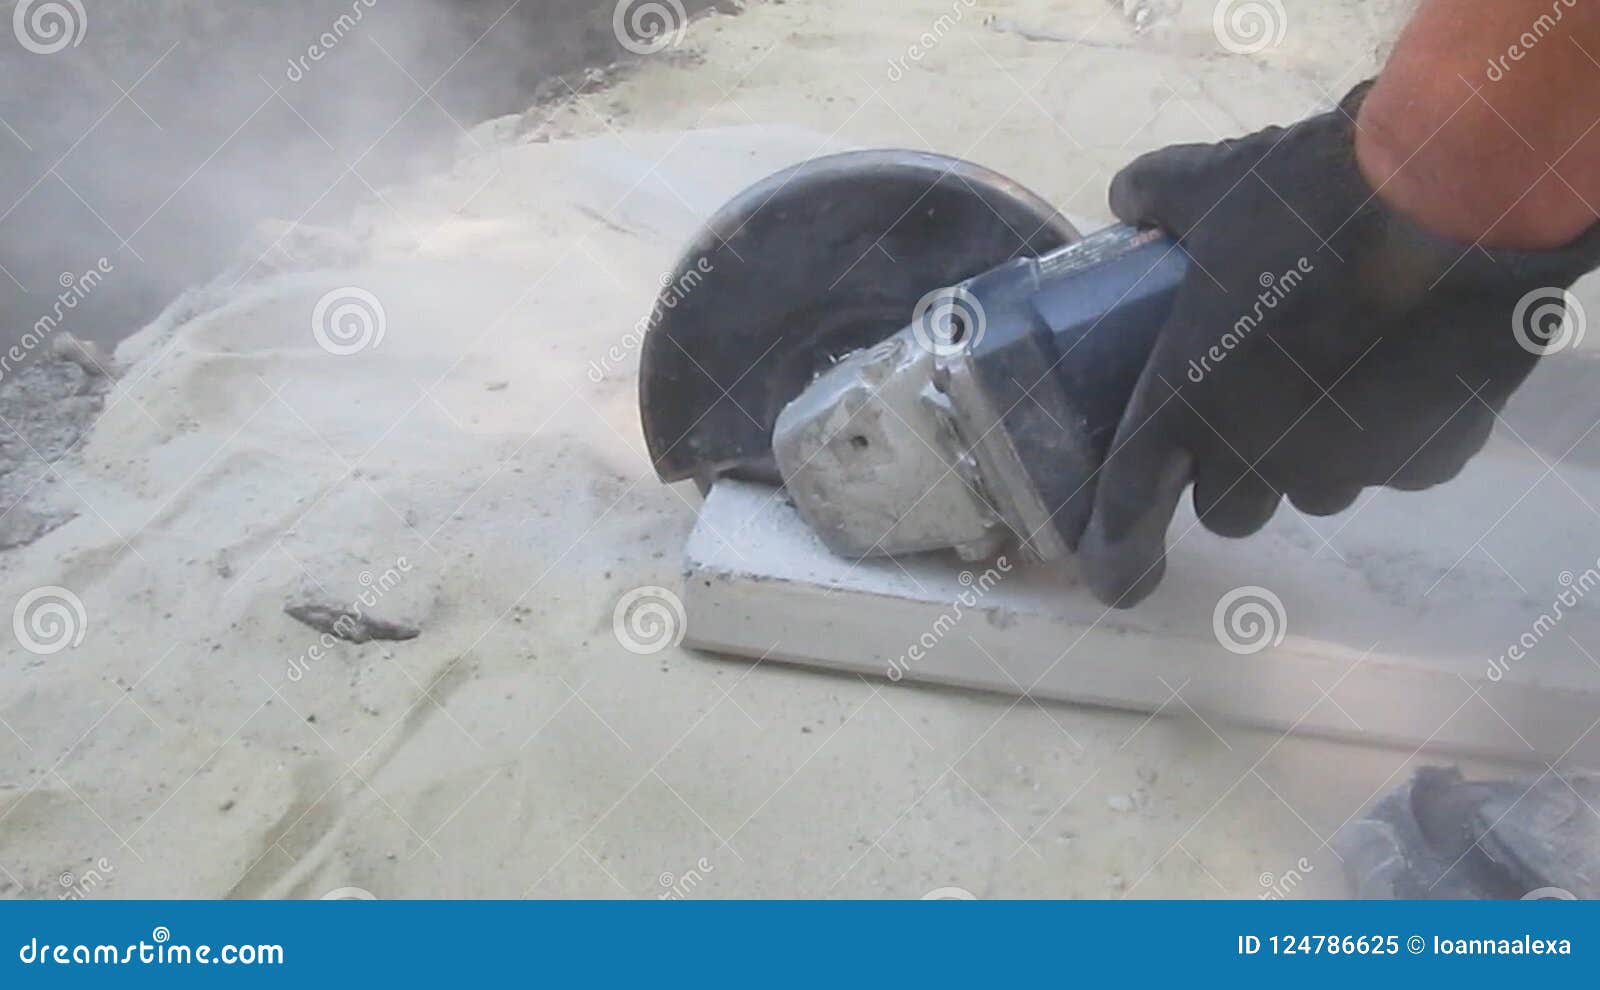 Cutting The Concrete Slab With An Angle Grinder 15s Stock Video